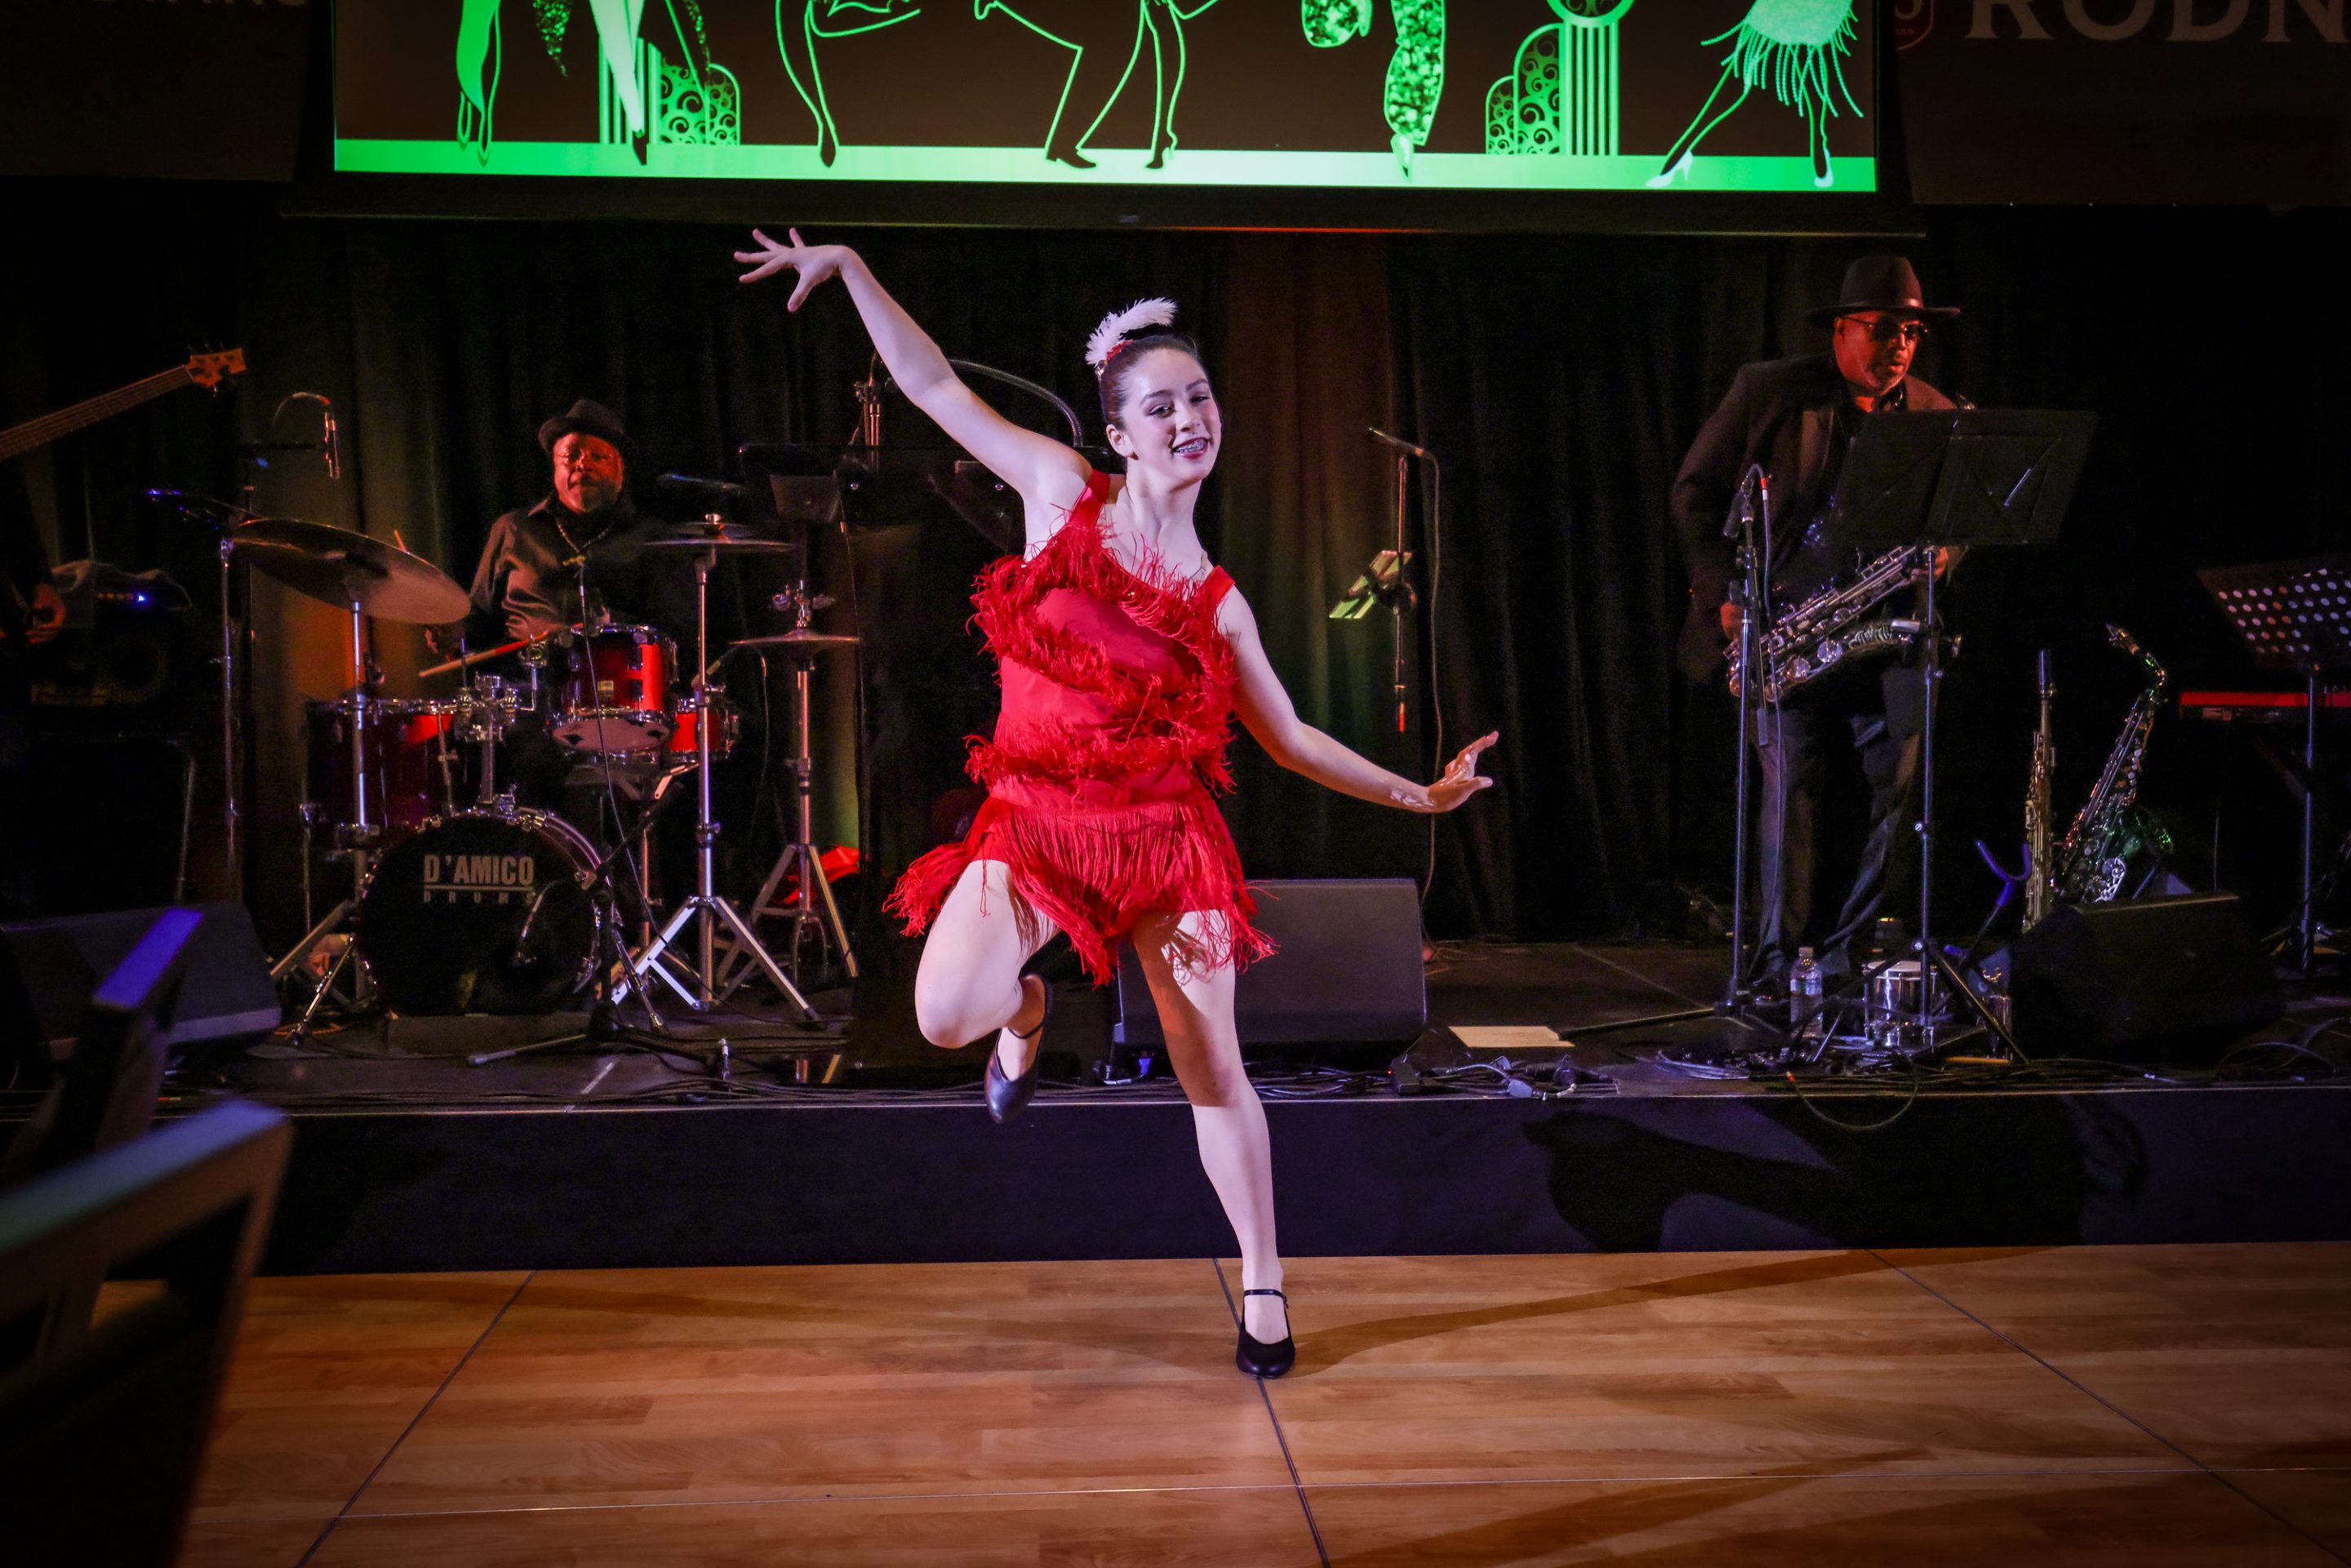 A woman in a red dress dancing on stage at a Santa Rosa Non-Profit event.